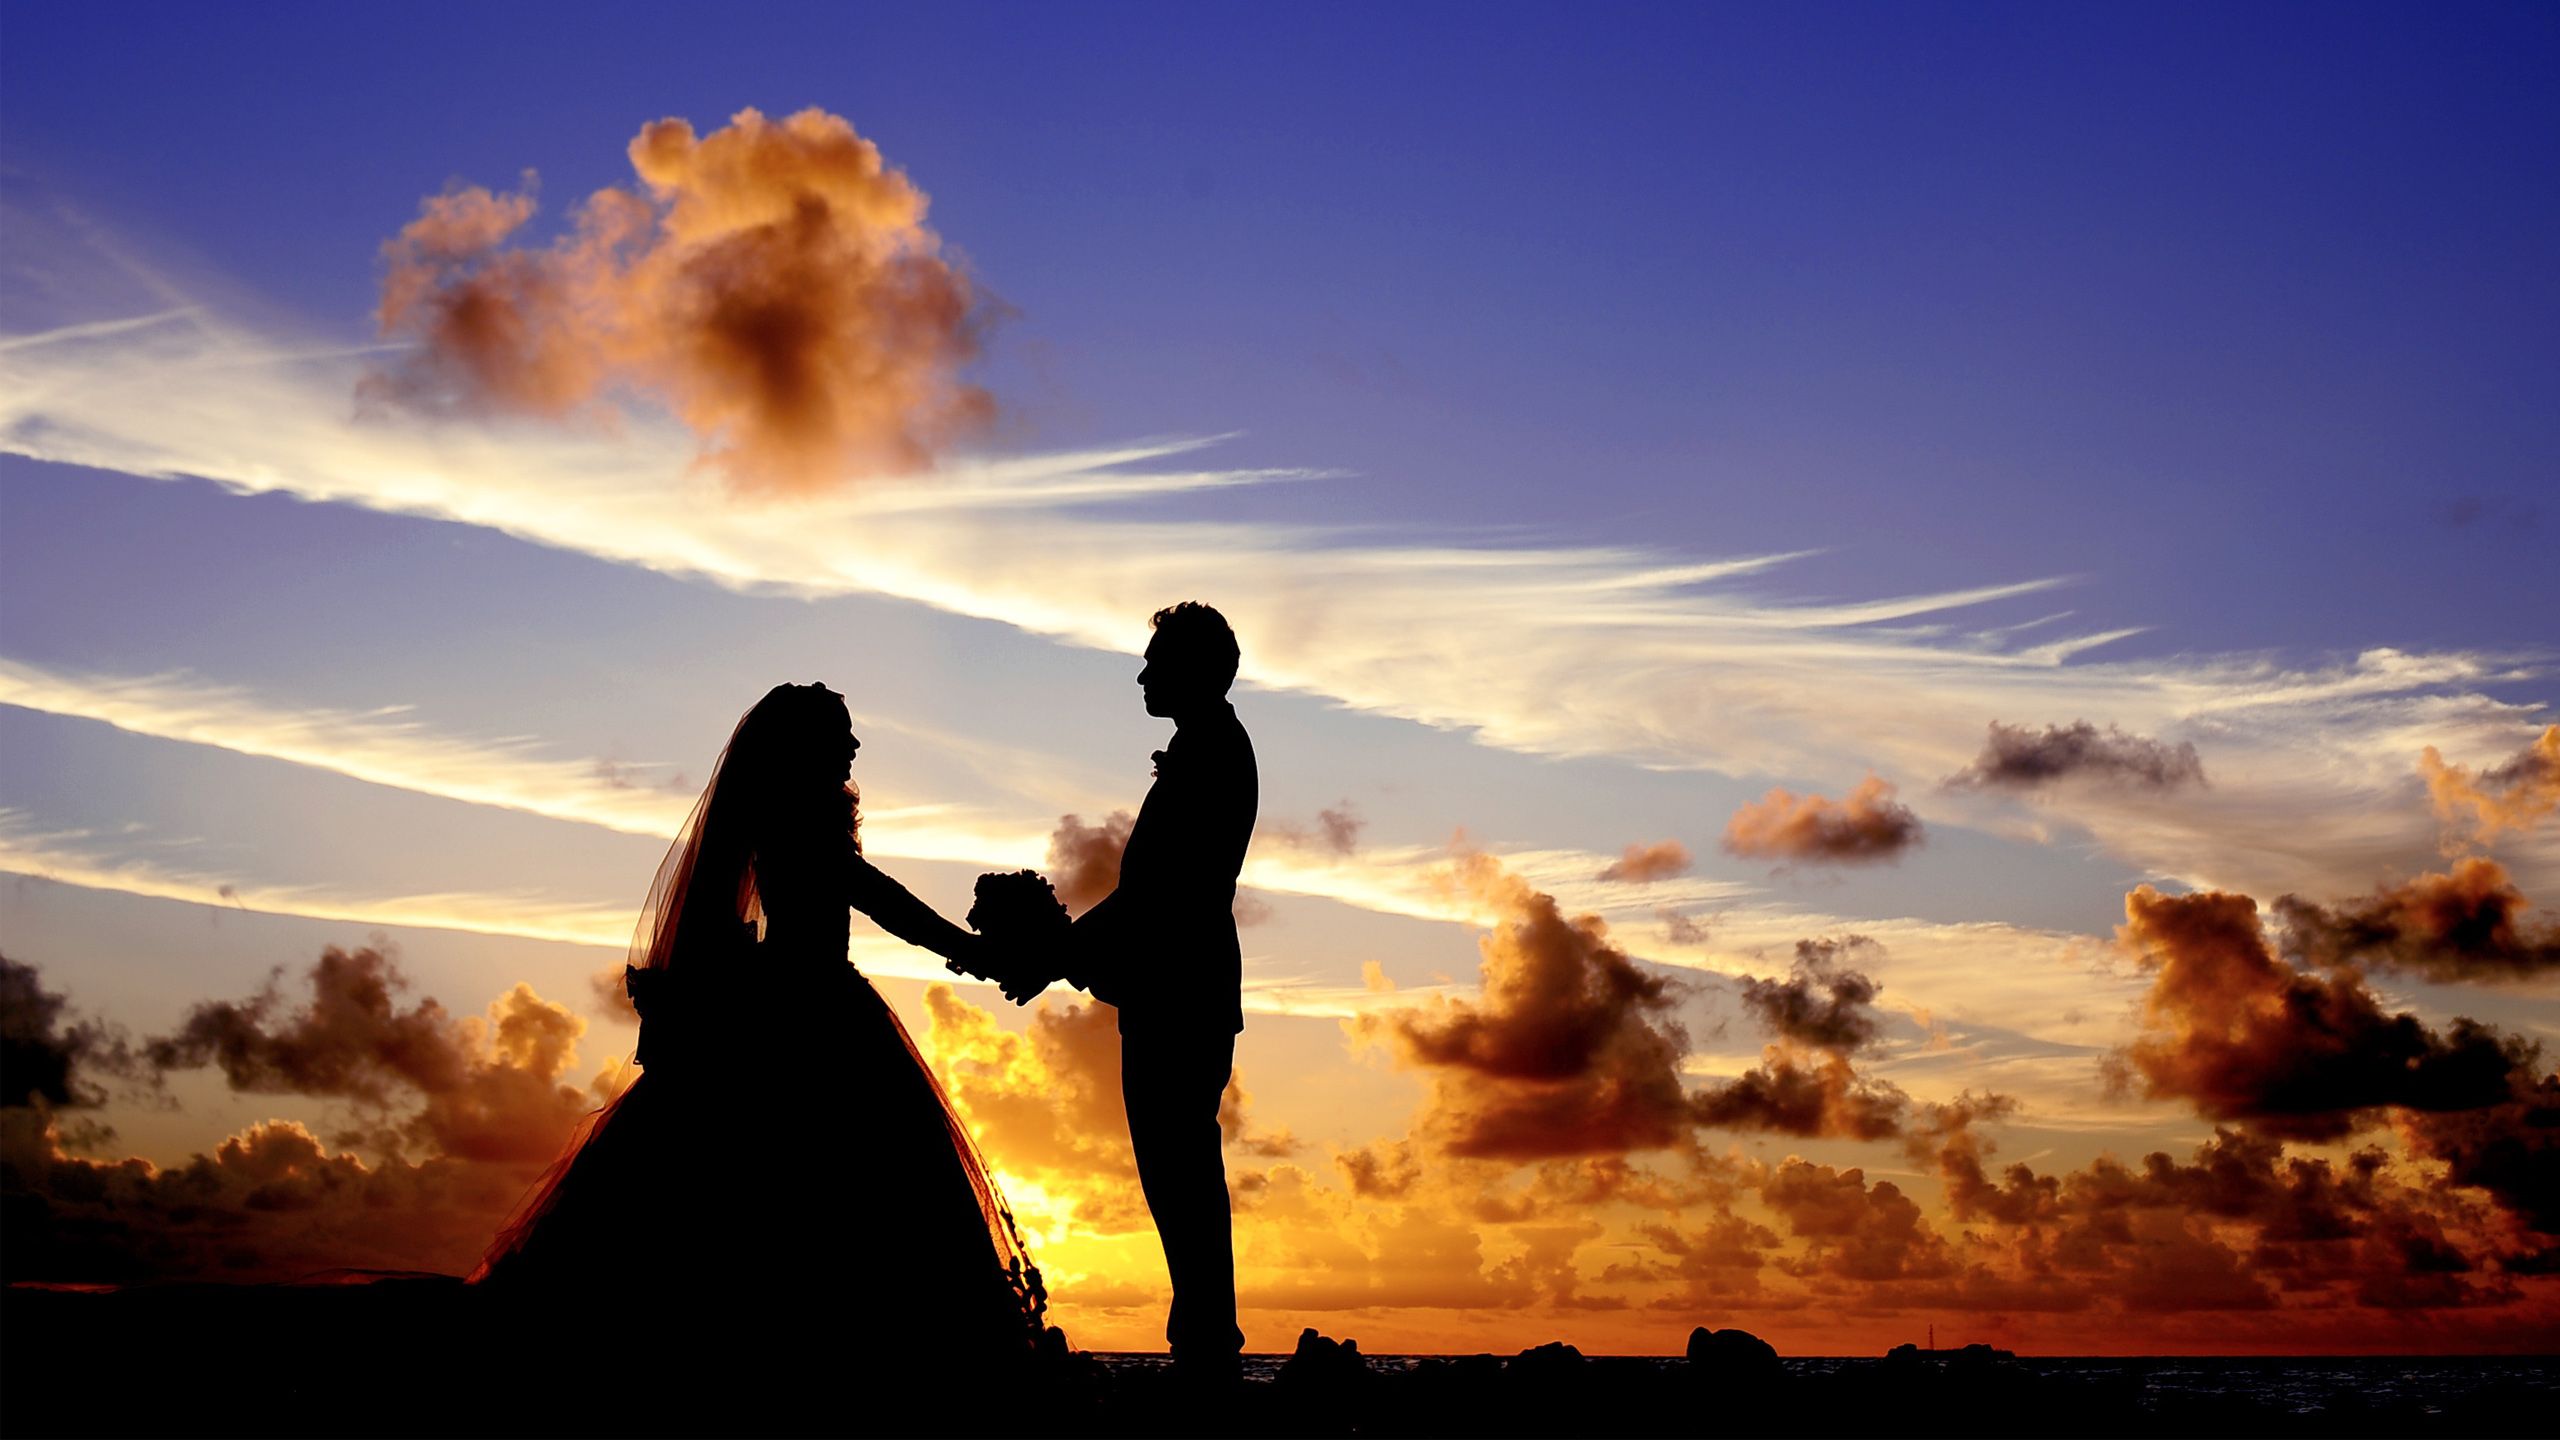 Married 4K wallpaper for your desktop or mobile screen free and easy to download